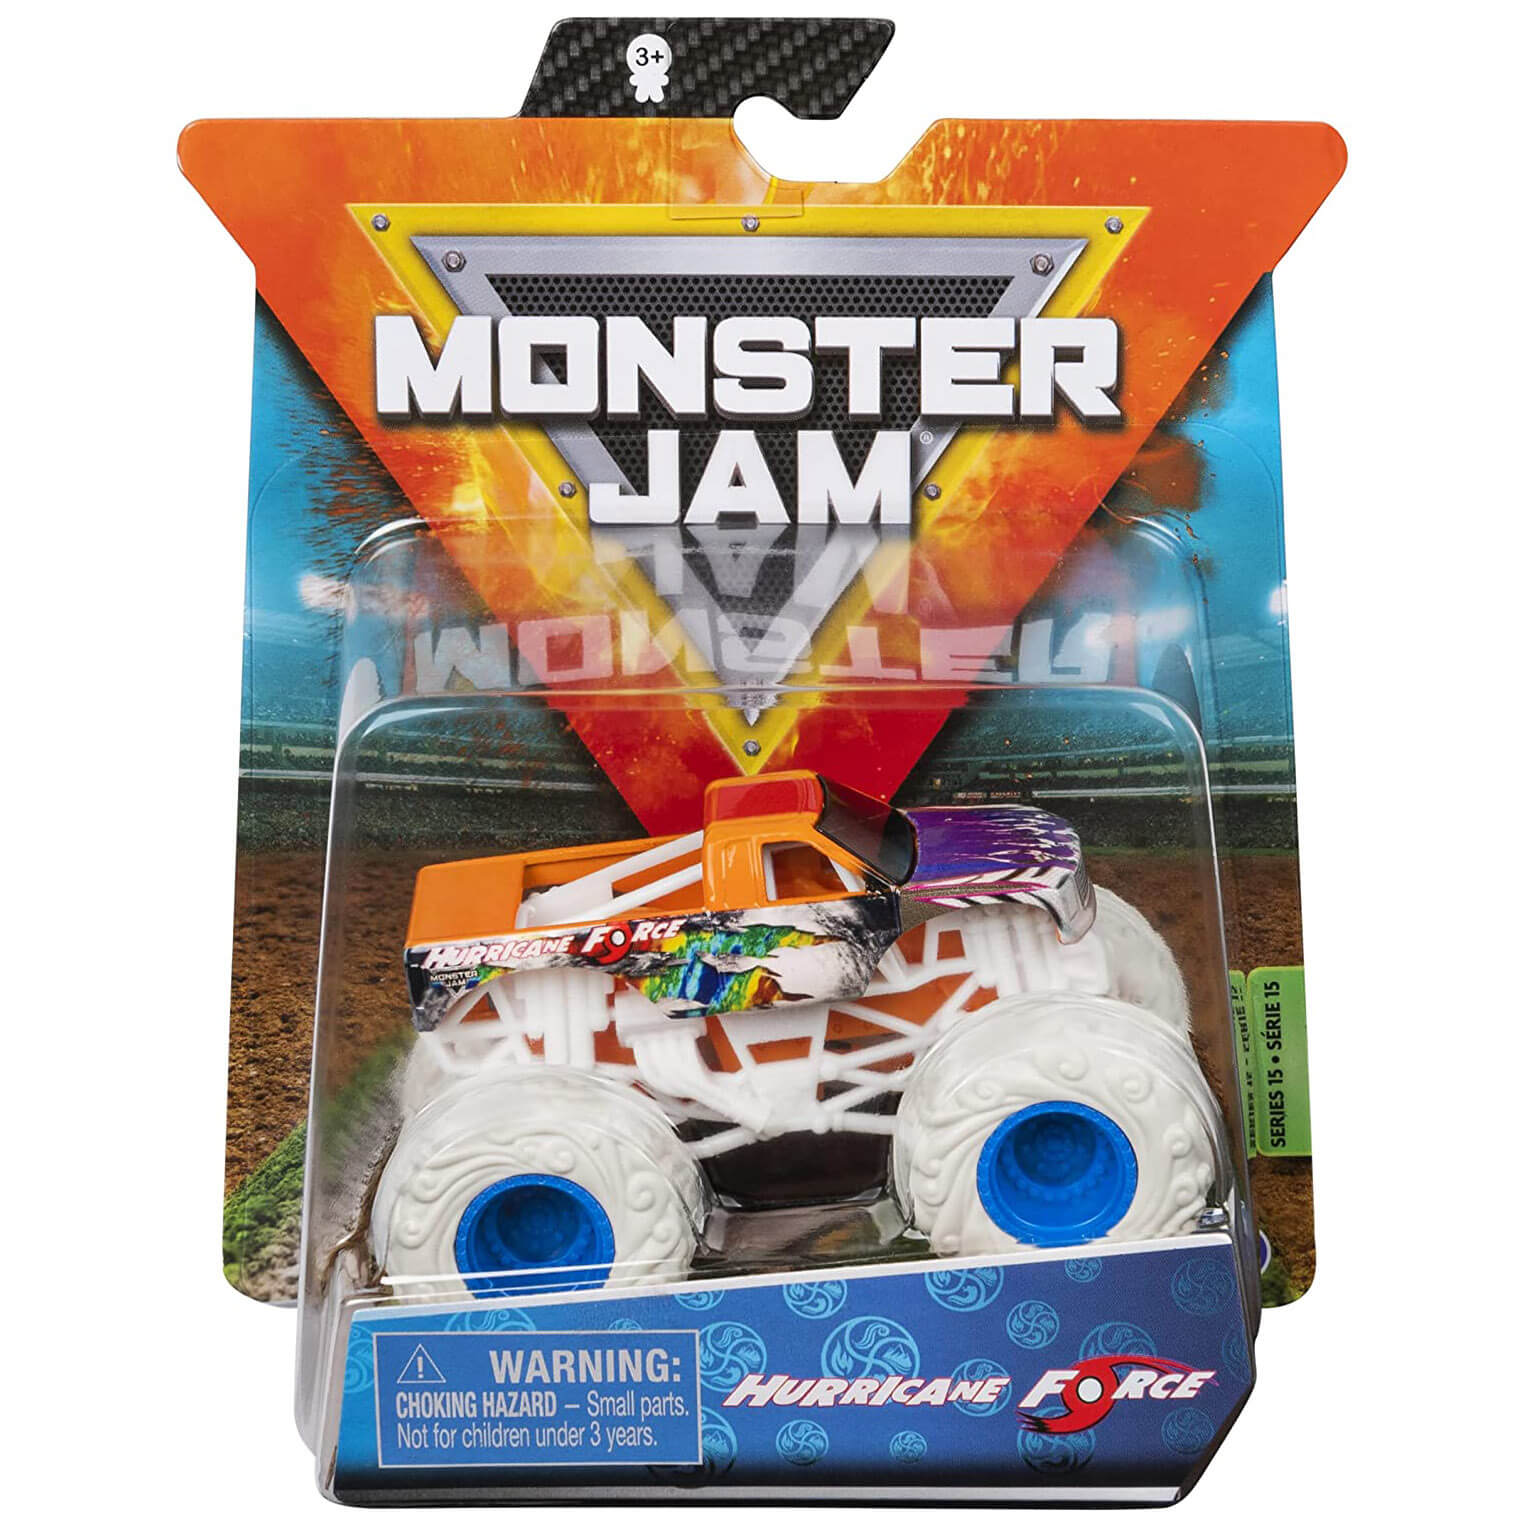 Monster Jam Hurricane Force 1:64 Scale Diecast Vehicle